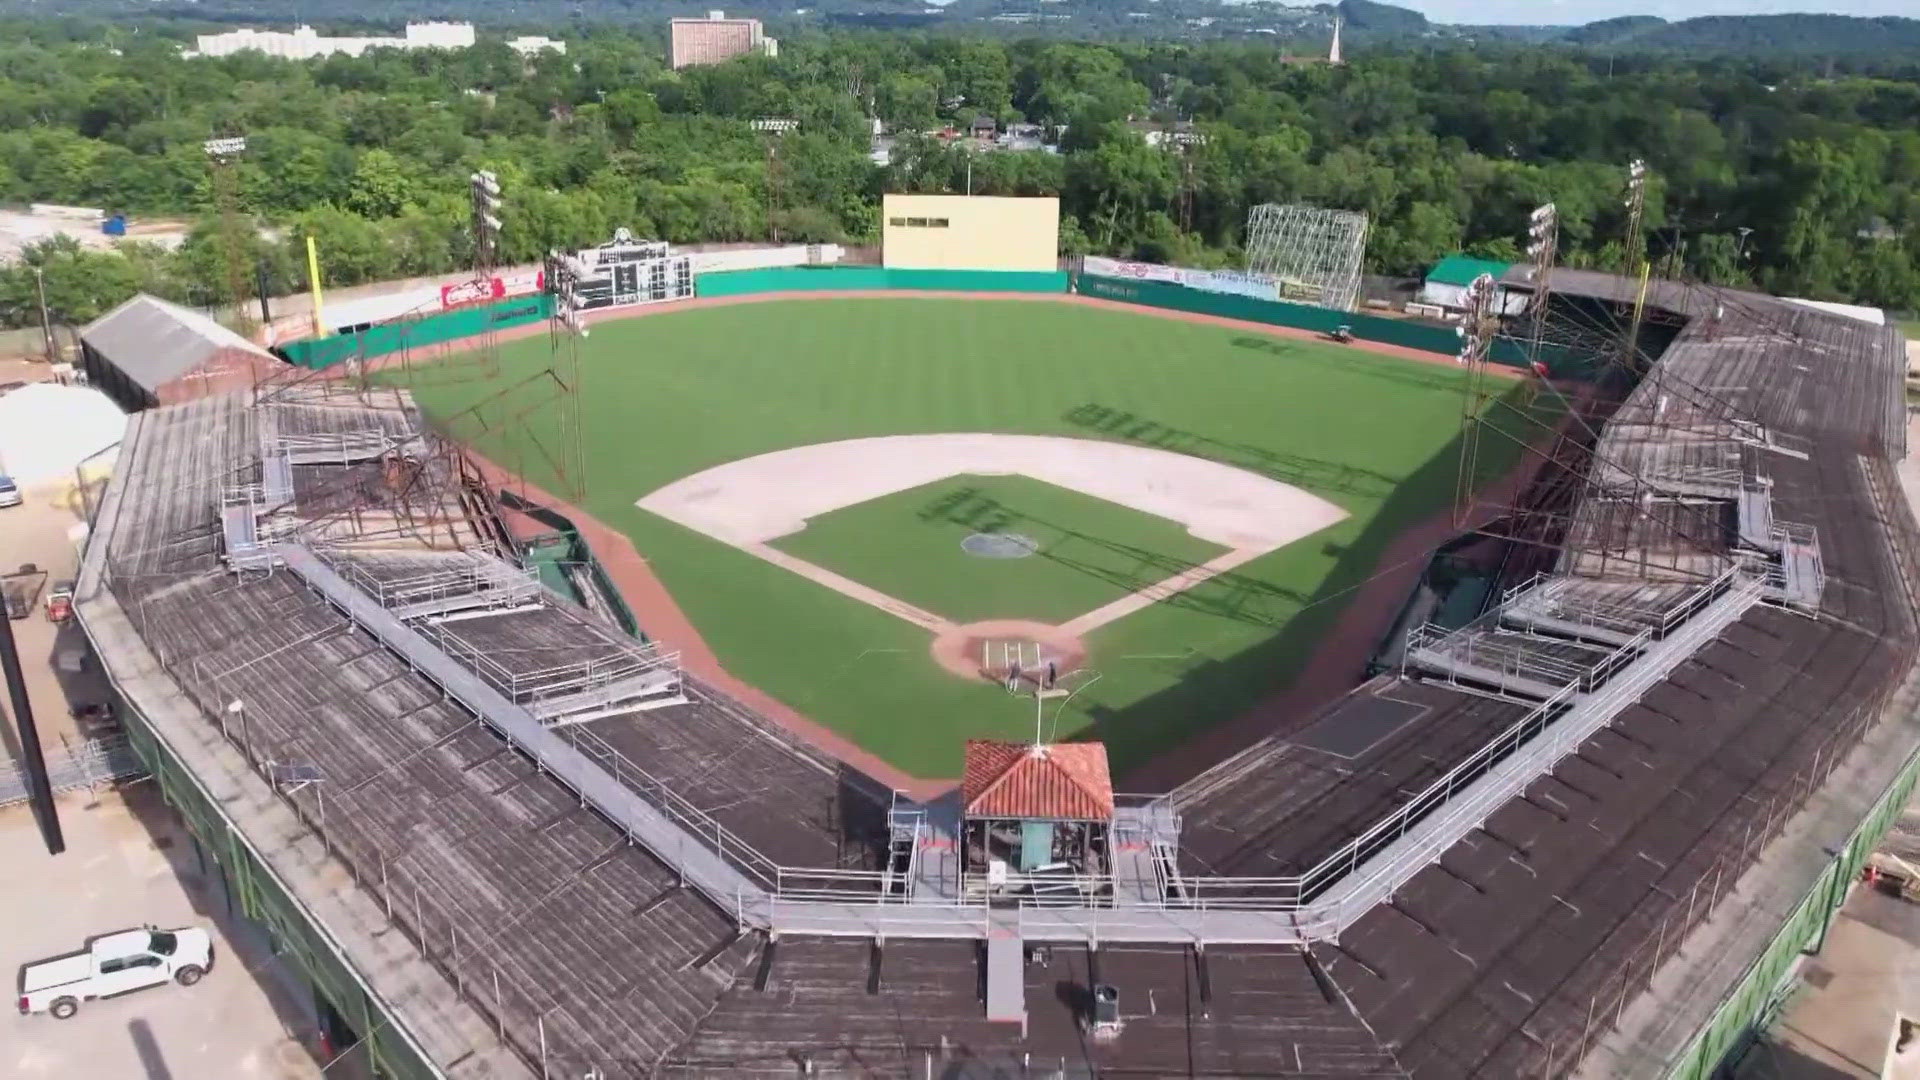 Rickwood Field in Birmingham, Alabama will host an MLB game honoring the once-thriving negro league.